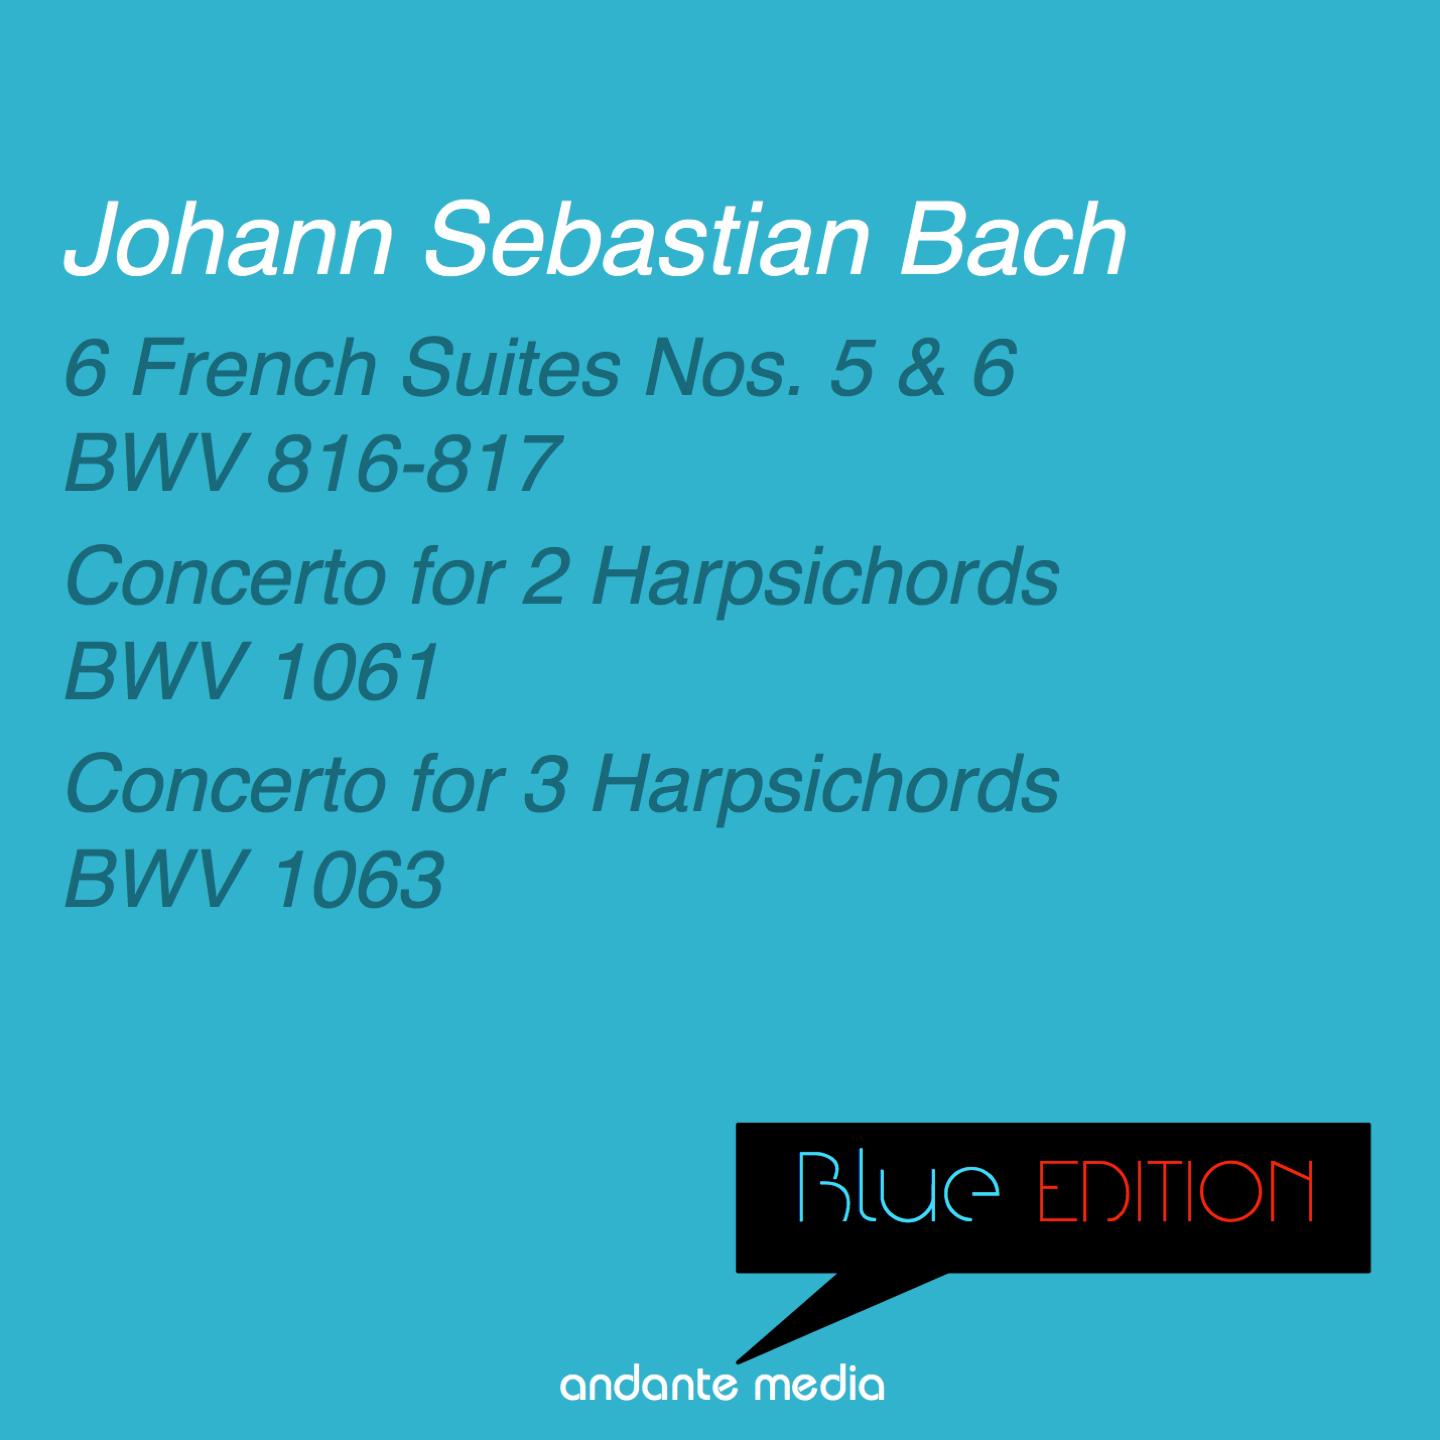 Blue Edition - Bach: 6 French Suites Nos. 5, 6 & Concertos for 2 and 3 Harpsichords